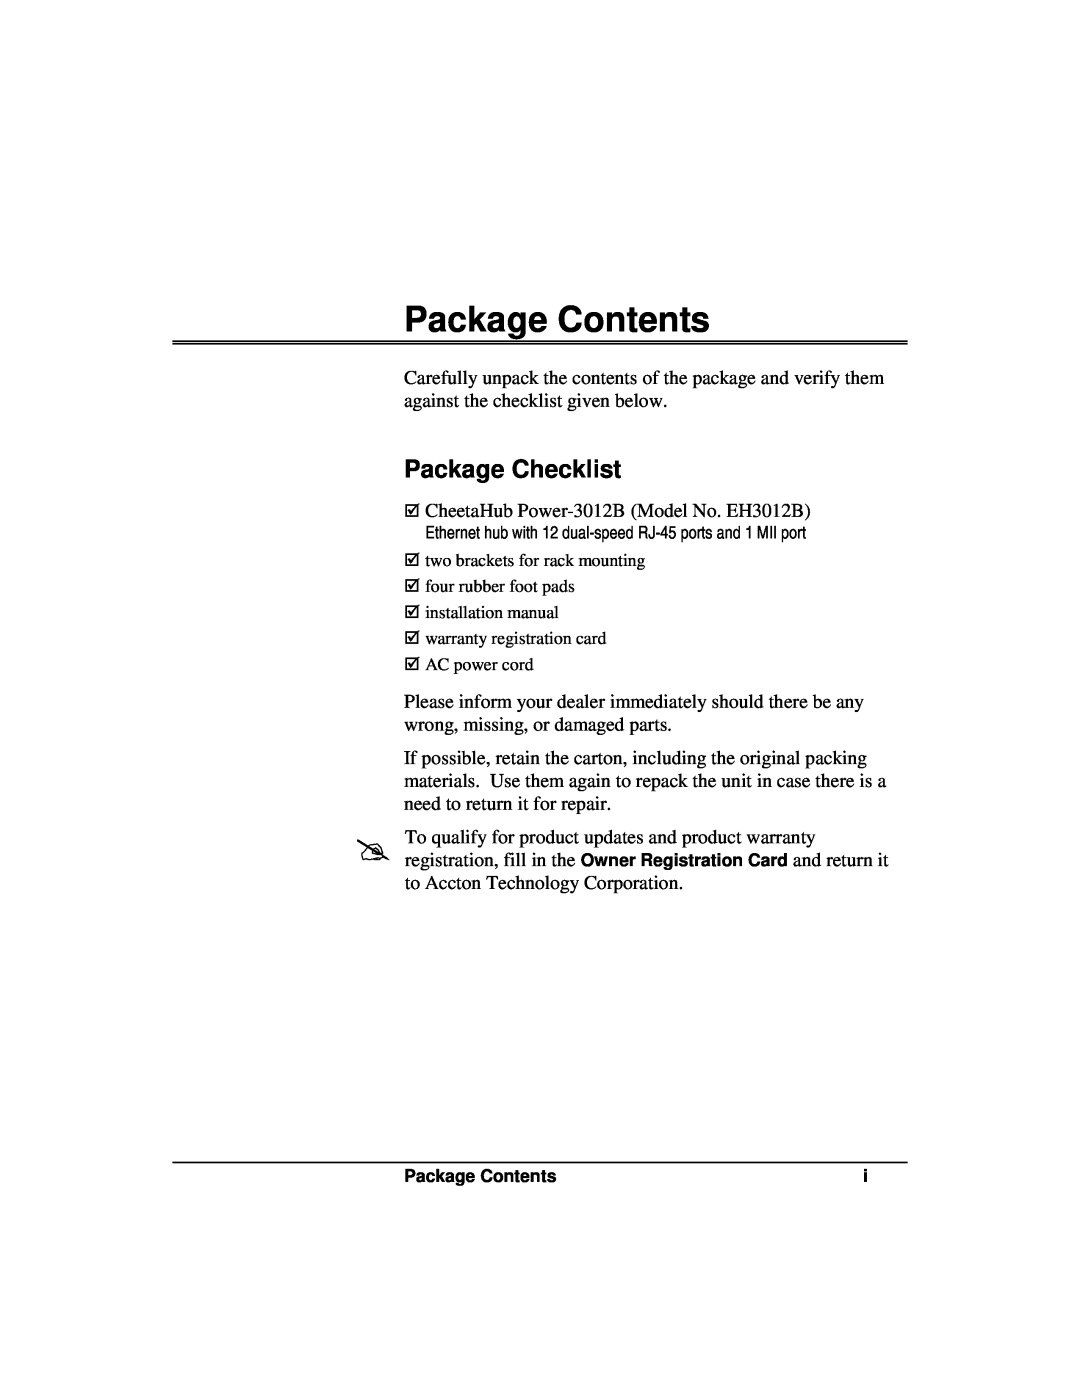 Accton Technology 3012B manual Package Contents, Package Checklist 